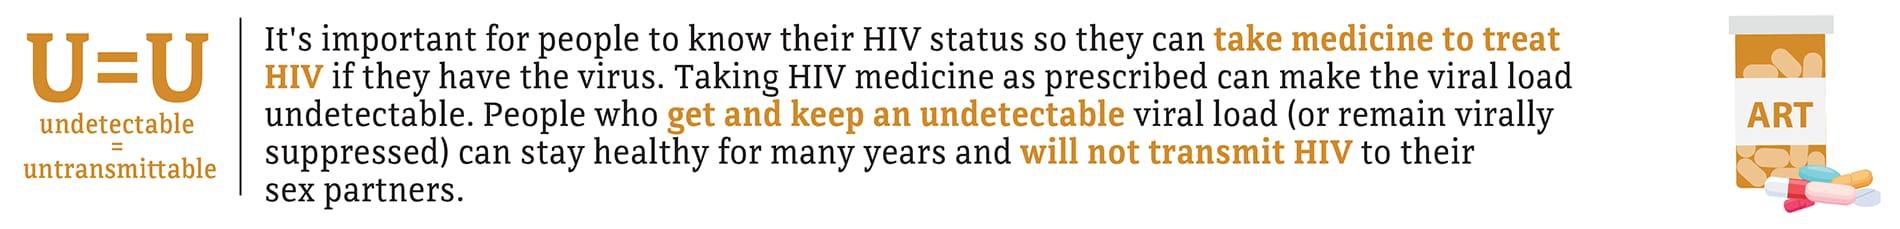 It's important for people to know their HIV status.